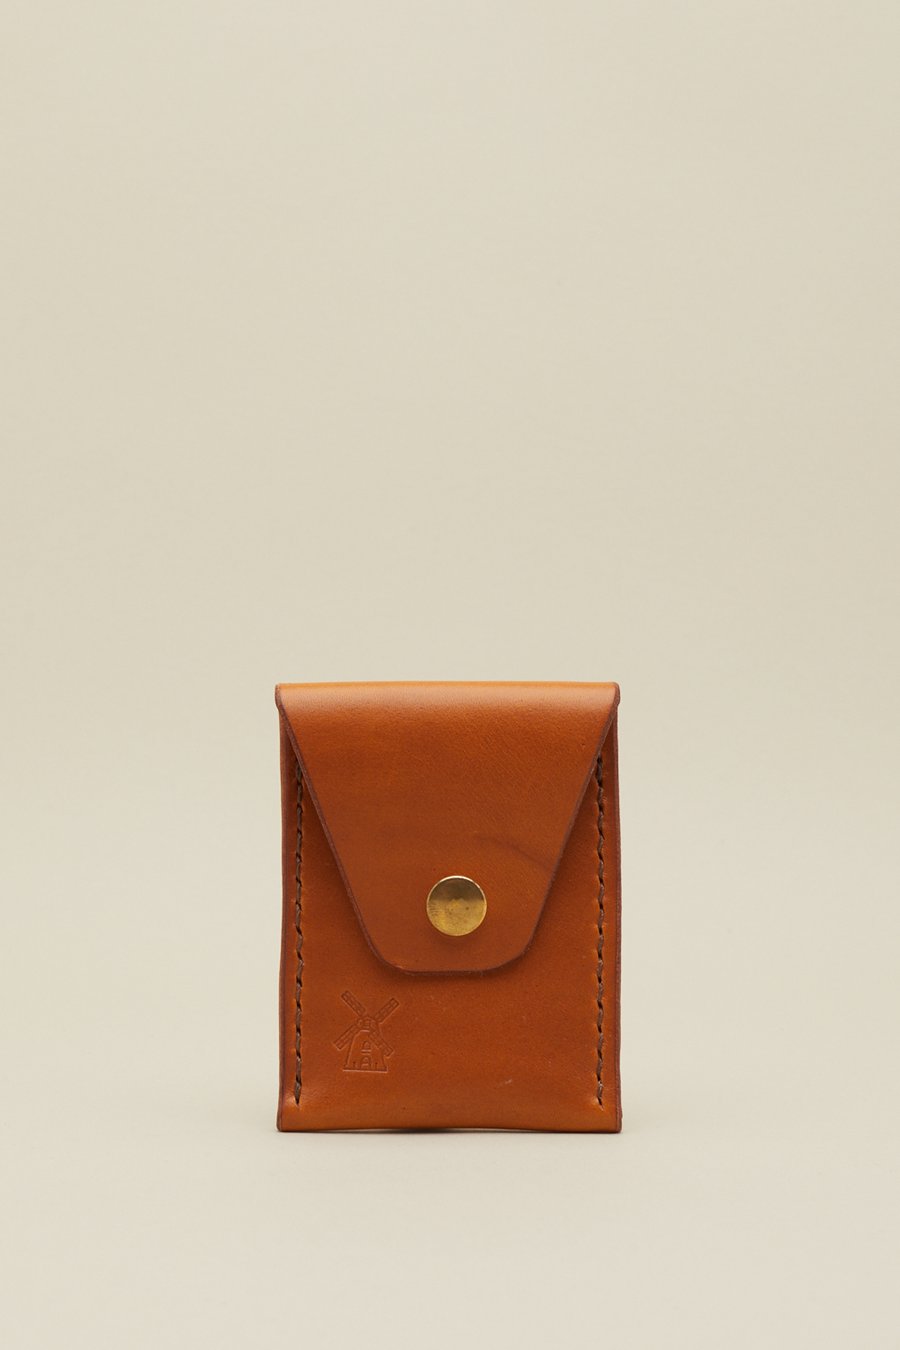 Image of Card Pouch in Tan